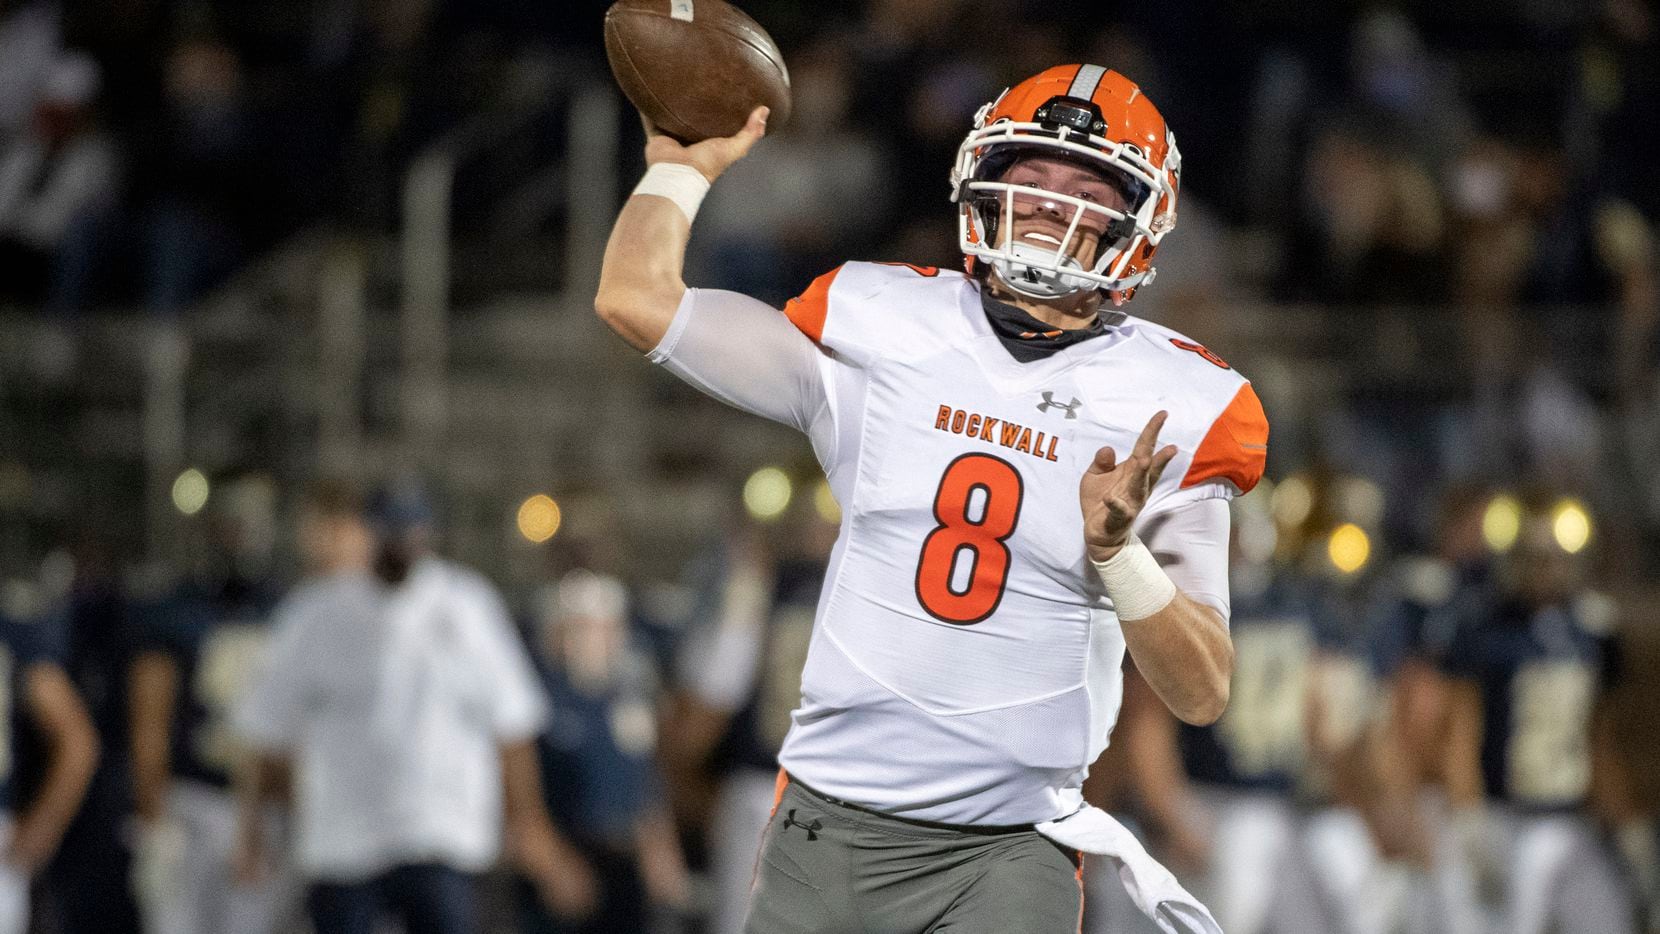 Rockwall junior quarterback Braedyn Locke (8) throws a pass during the second half of a high school football game against Jesuit on Friday, October 2, 2020 at Postell Stadium in Dallas. Rockwall won 60-38.